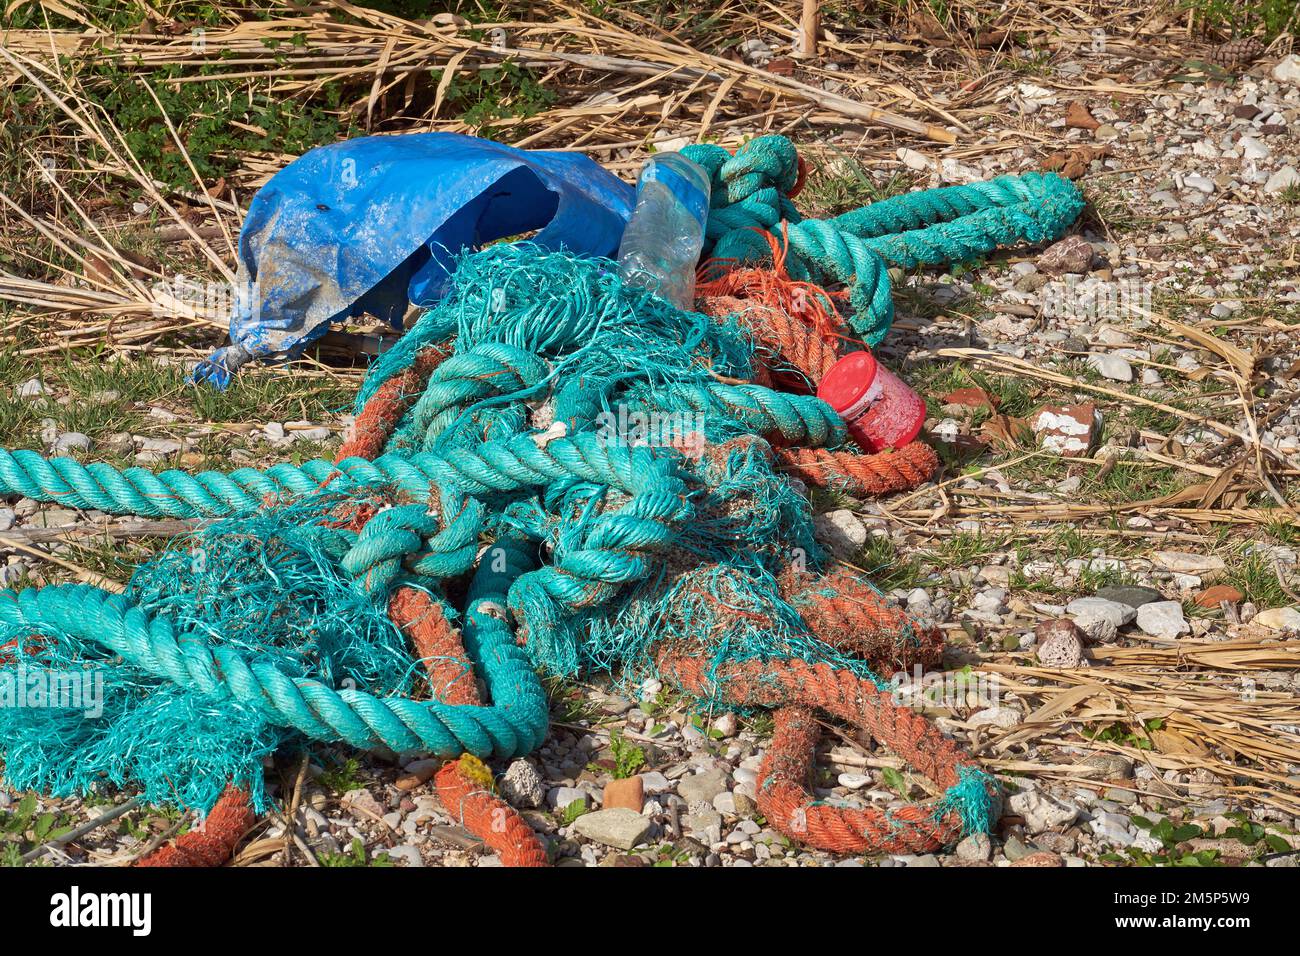 Cordage and plastic rubbish washed up on the beach, Peloponnese, Greece Stock Photo